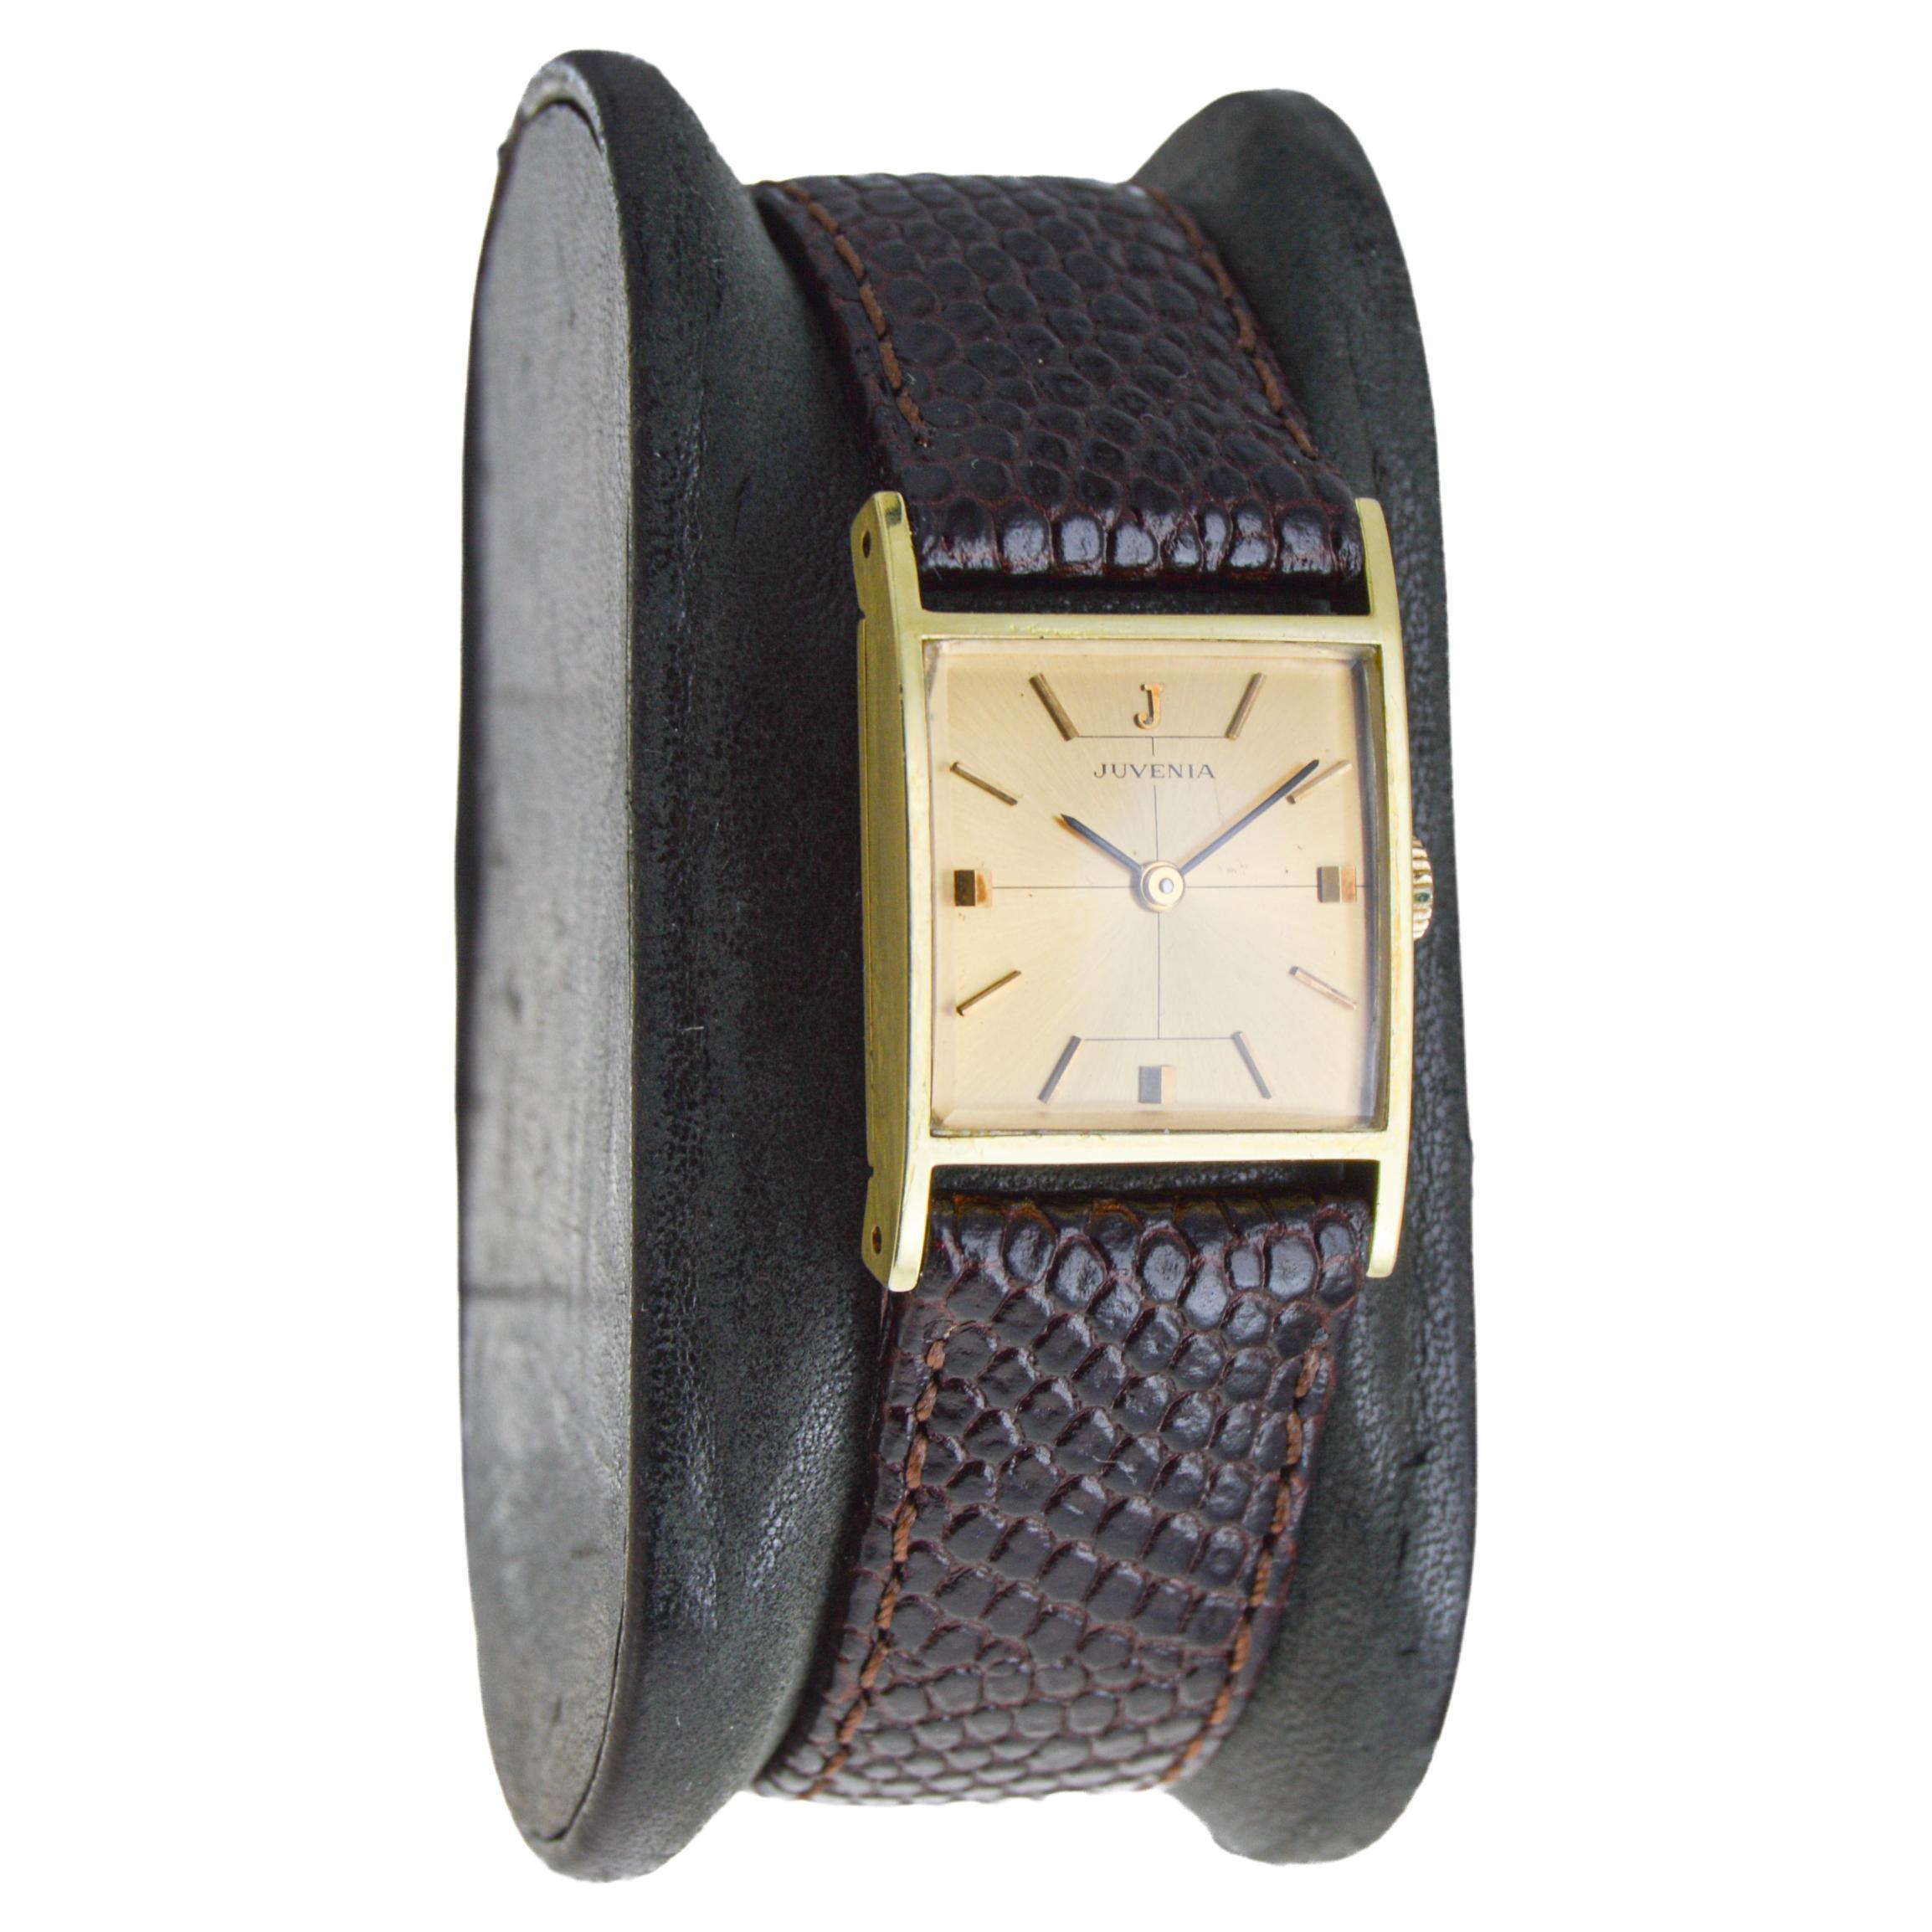 FACTORY / HOUSE: Juvenia Watch Company
STYLE / REFERENCE: Art Deco
METAL / MATERIAL: Yellow Gold-Filled
CIRCA / YEAR: 1950's
DIMENSIONS / SIZE: Length 28mm X Width 19mm
MOVEMENT / CALIBER: Manual Winding / 17 Jewels / Caliber 765
DIAL / HANDS: